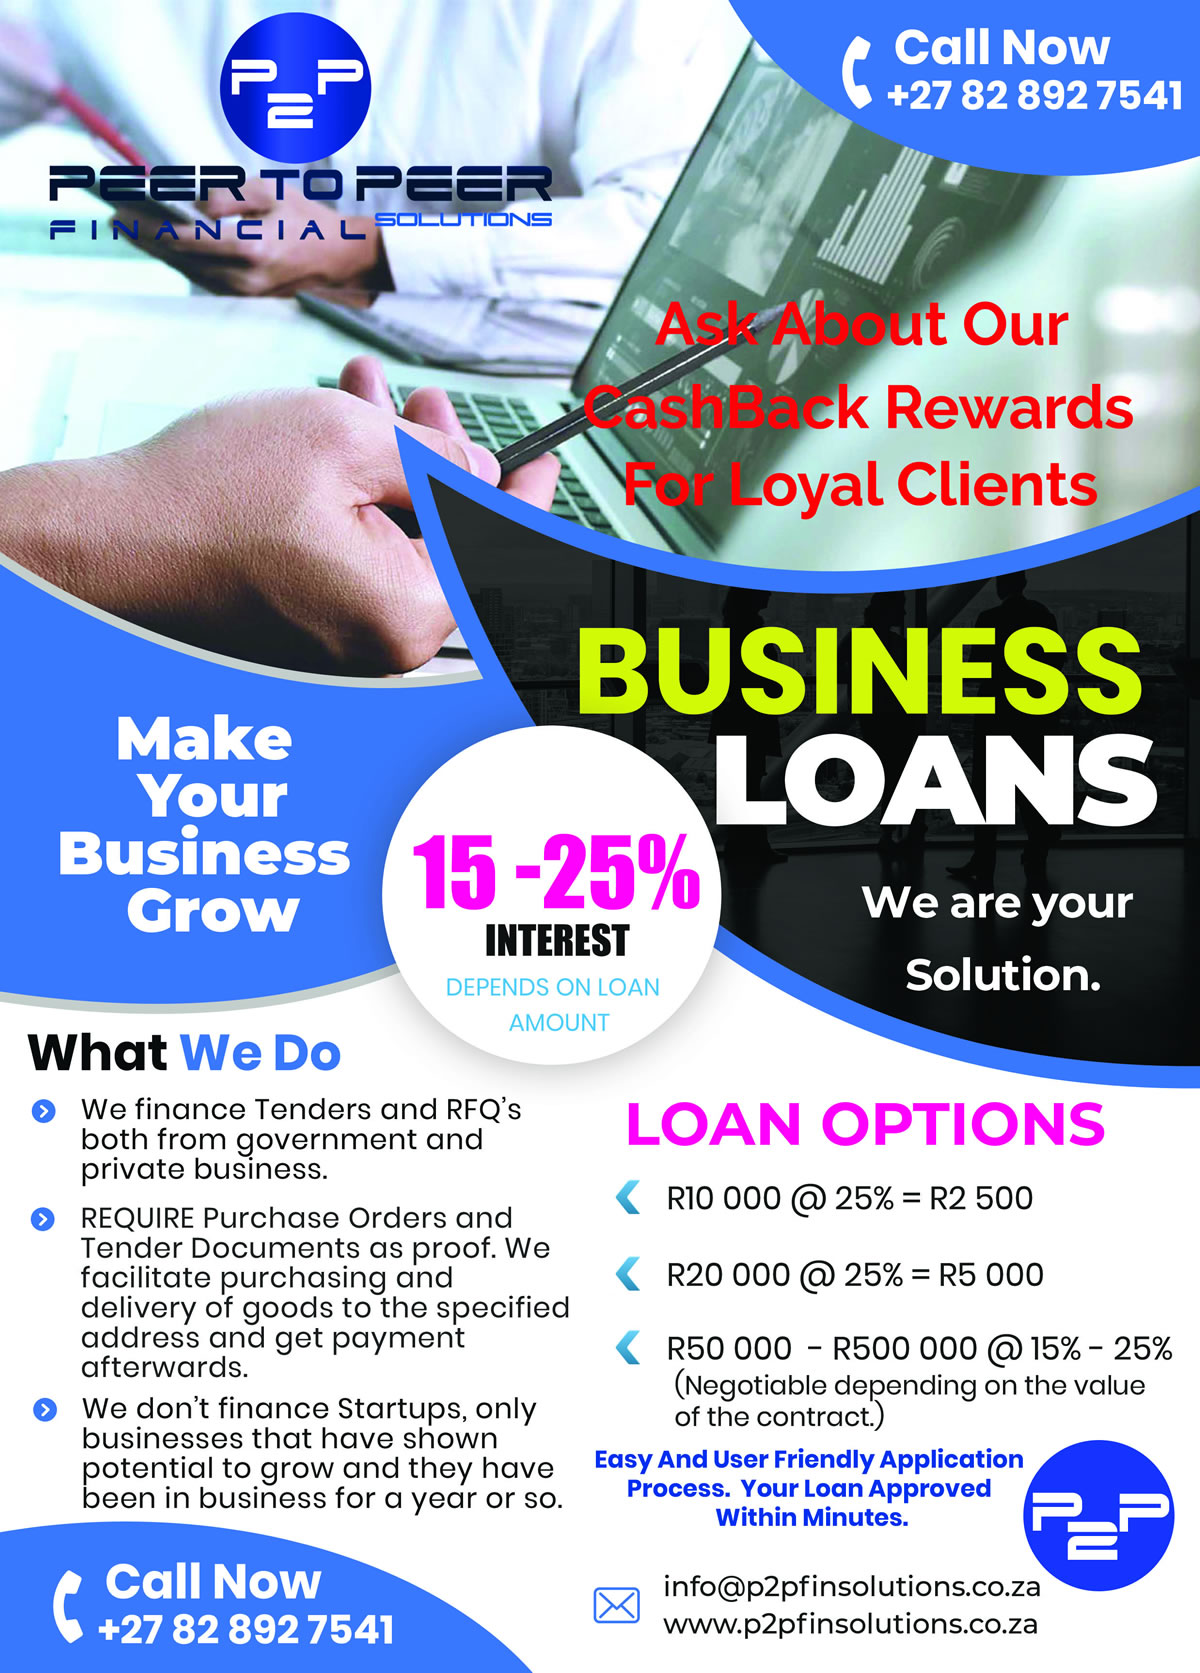 P2P Financial Solutions South African Financial Loans in